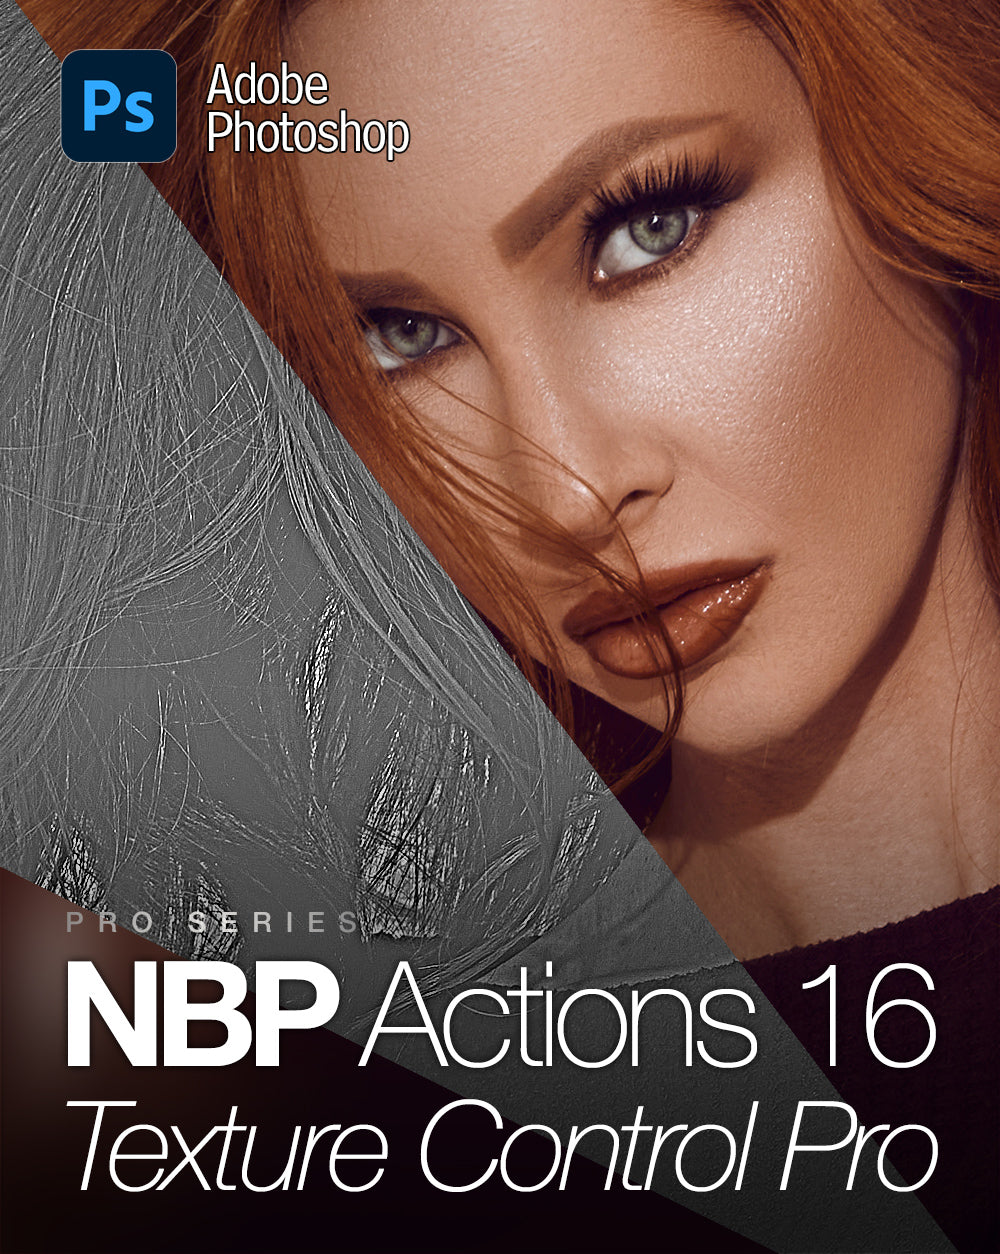 NBP Actions 16: Texture Control Pro for Photoshop